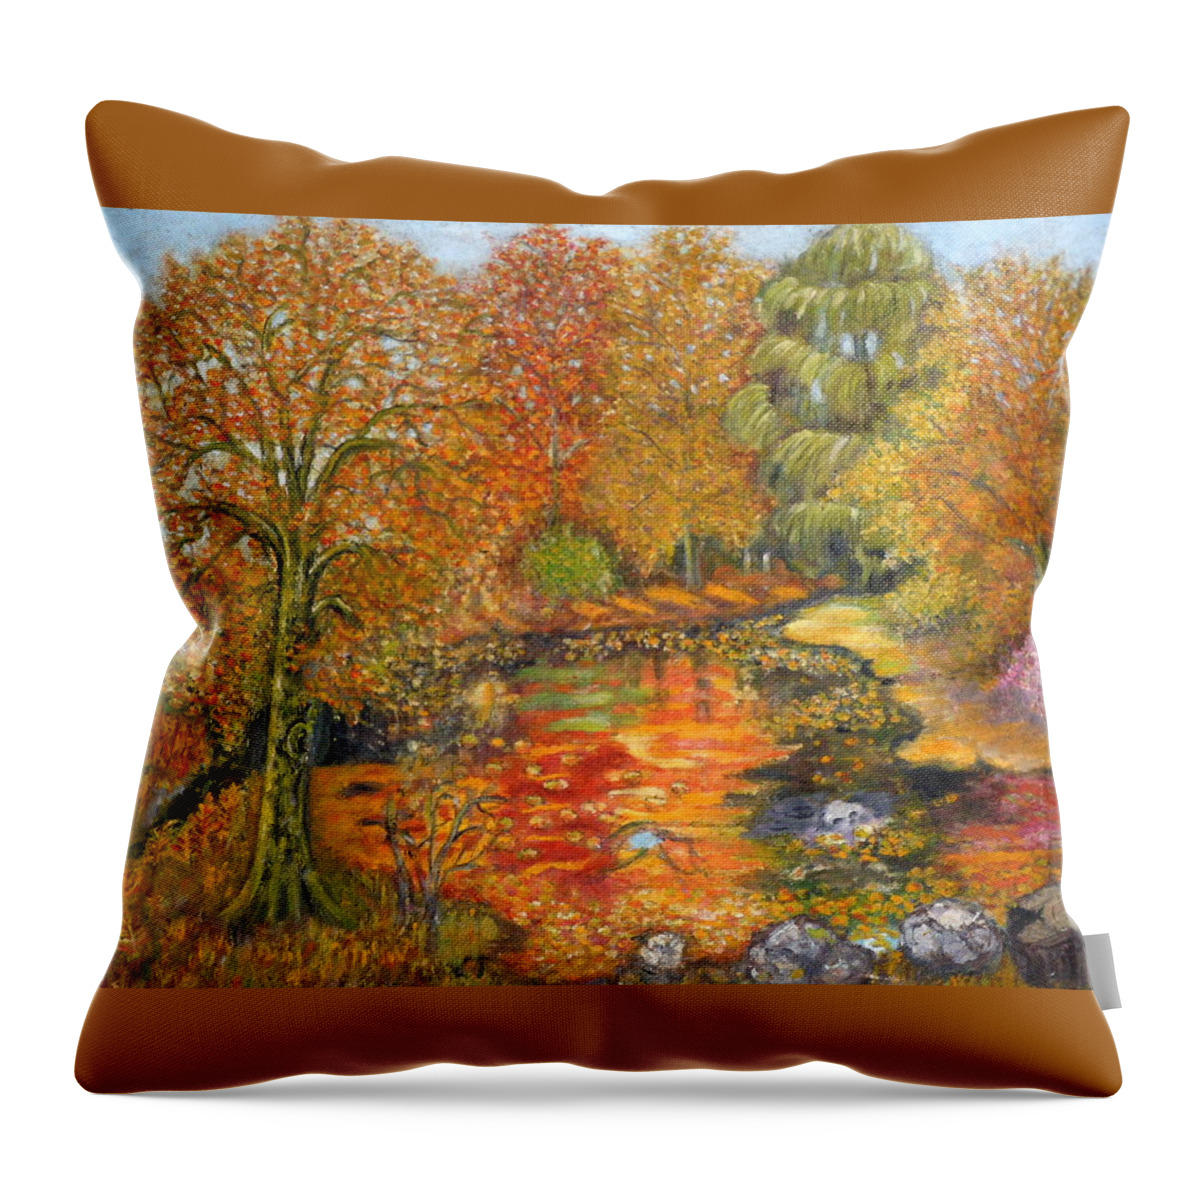 Trees Throw Pillow featuring the painting Autumn Colours by Greta Gartner